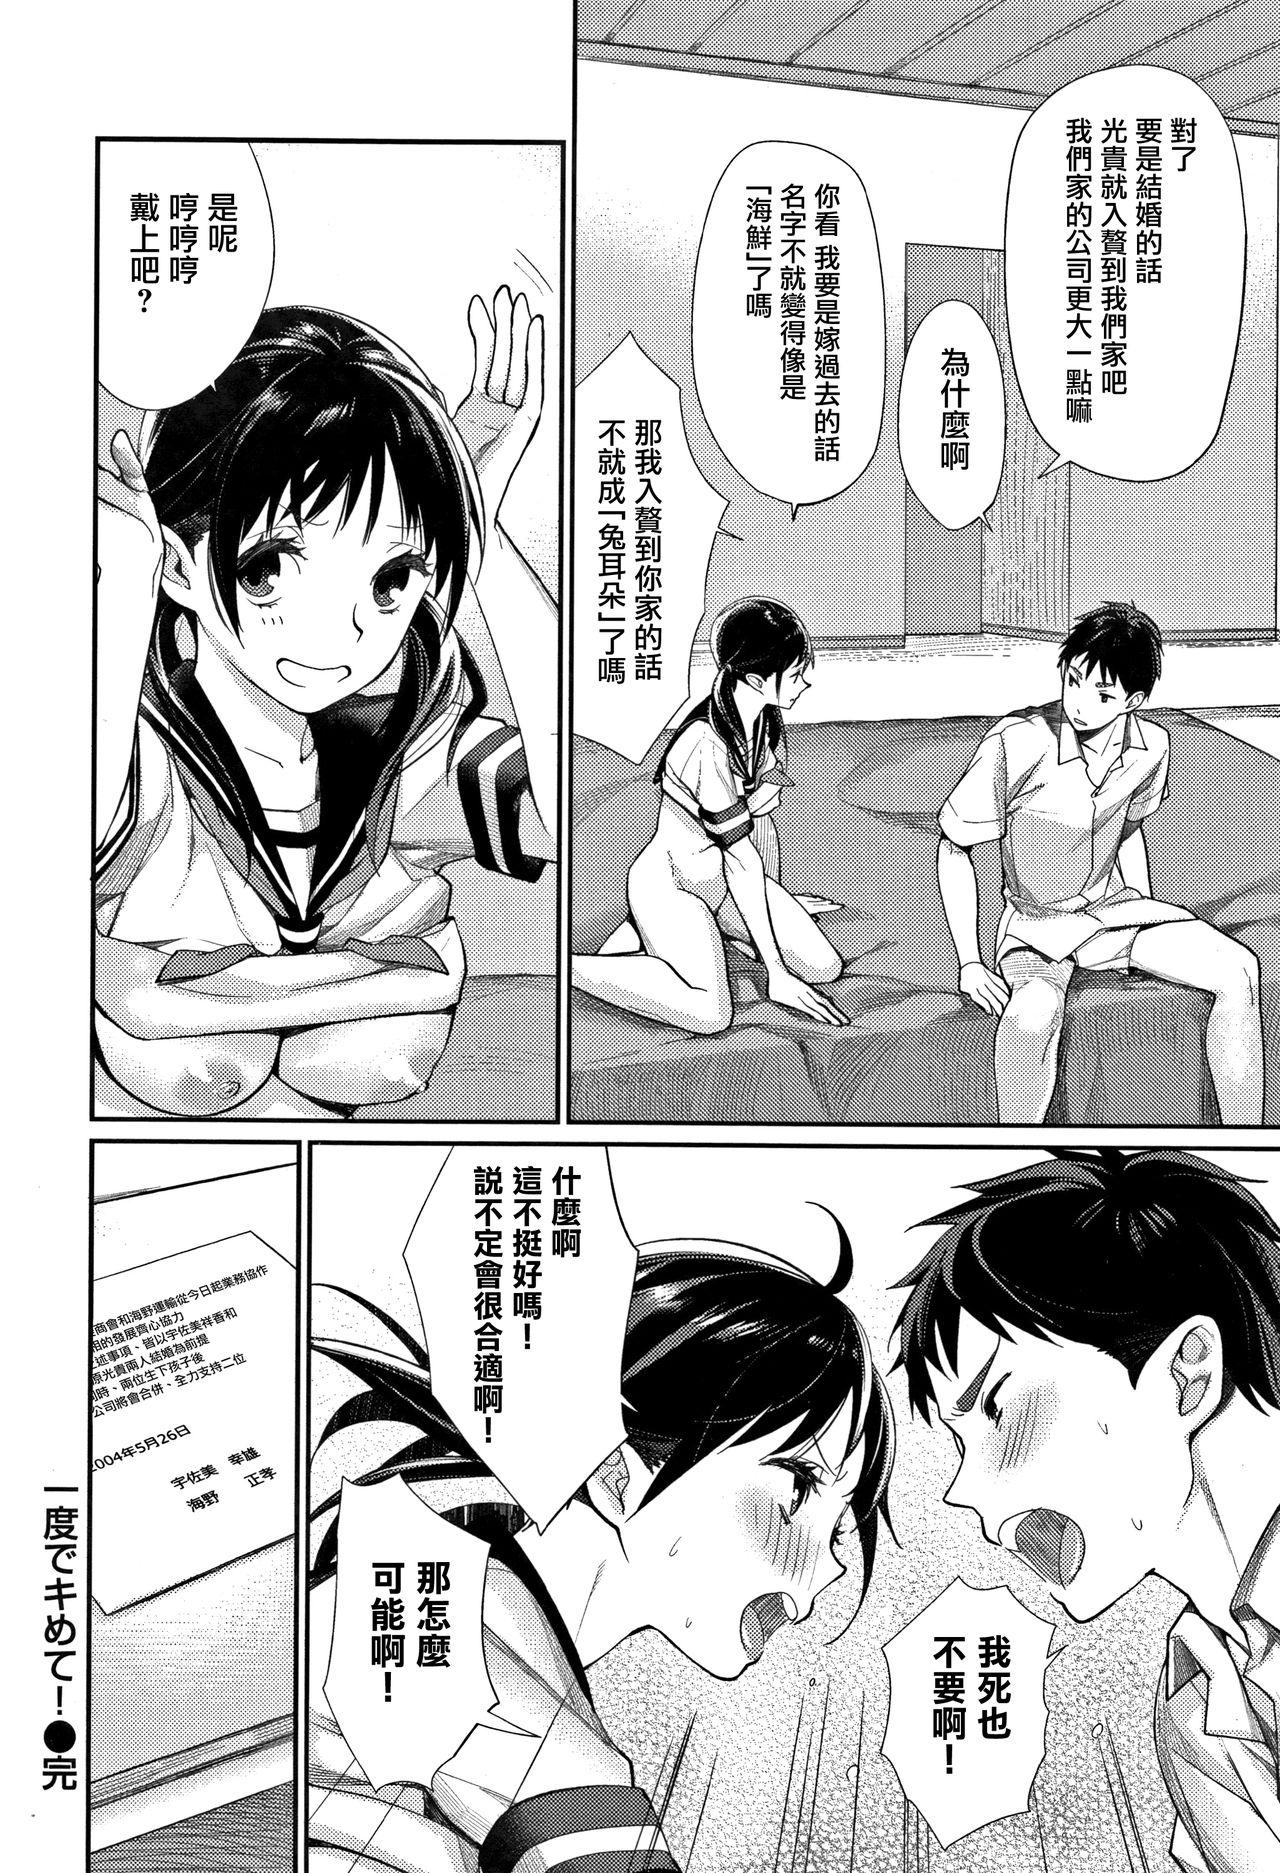 [MGMEE] Bokura no Etude - Our H Chu Do Ch.1-6 [Chinese] [無邪気漢化組] 99